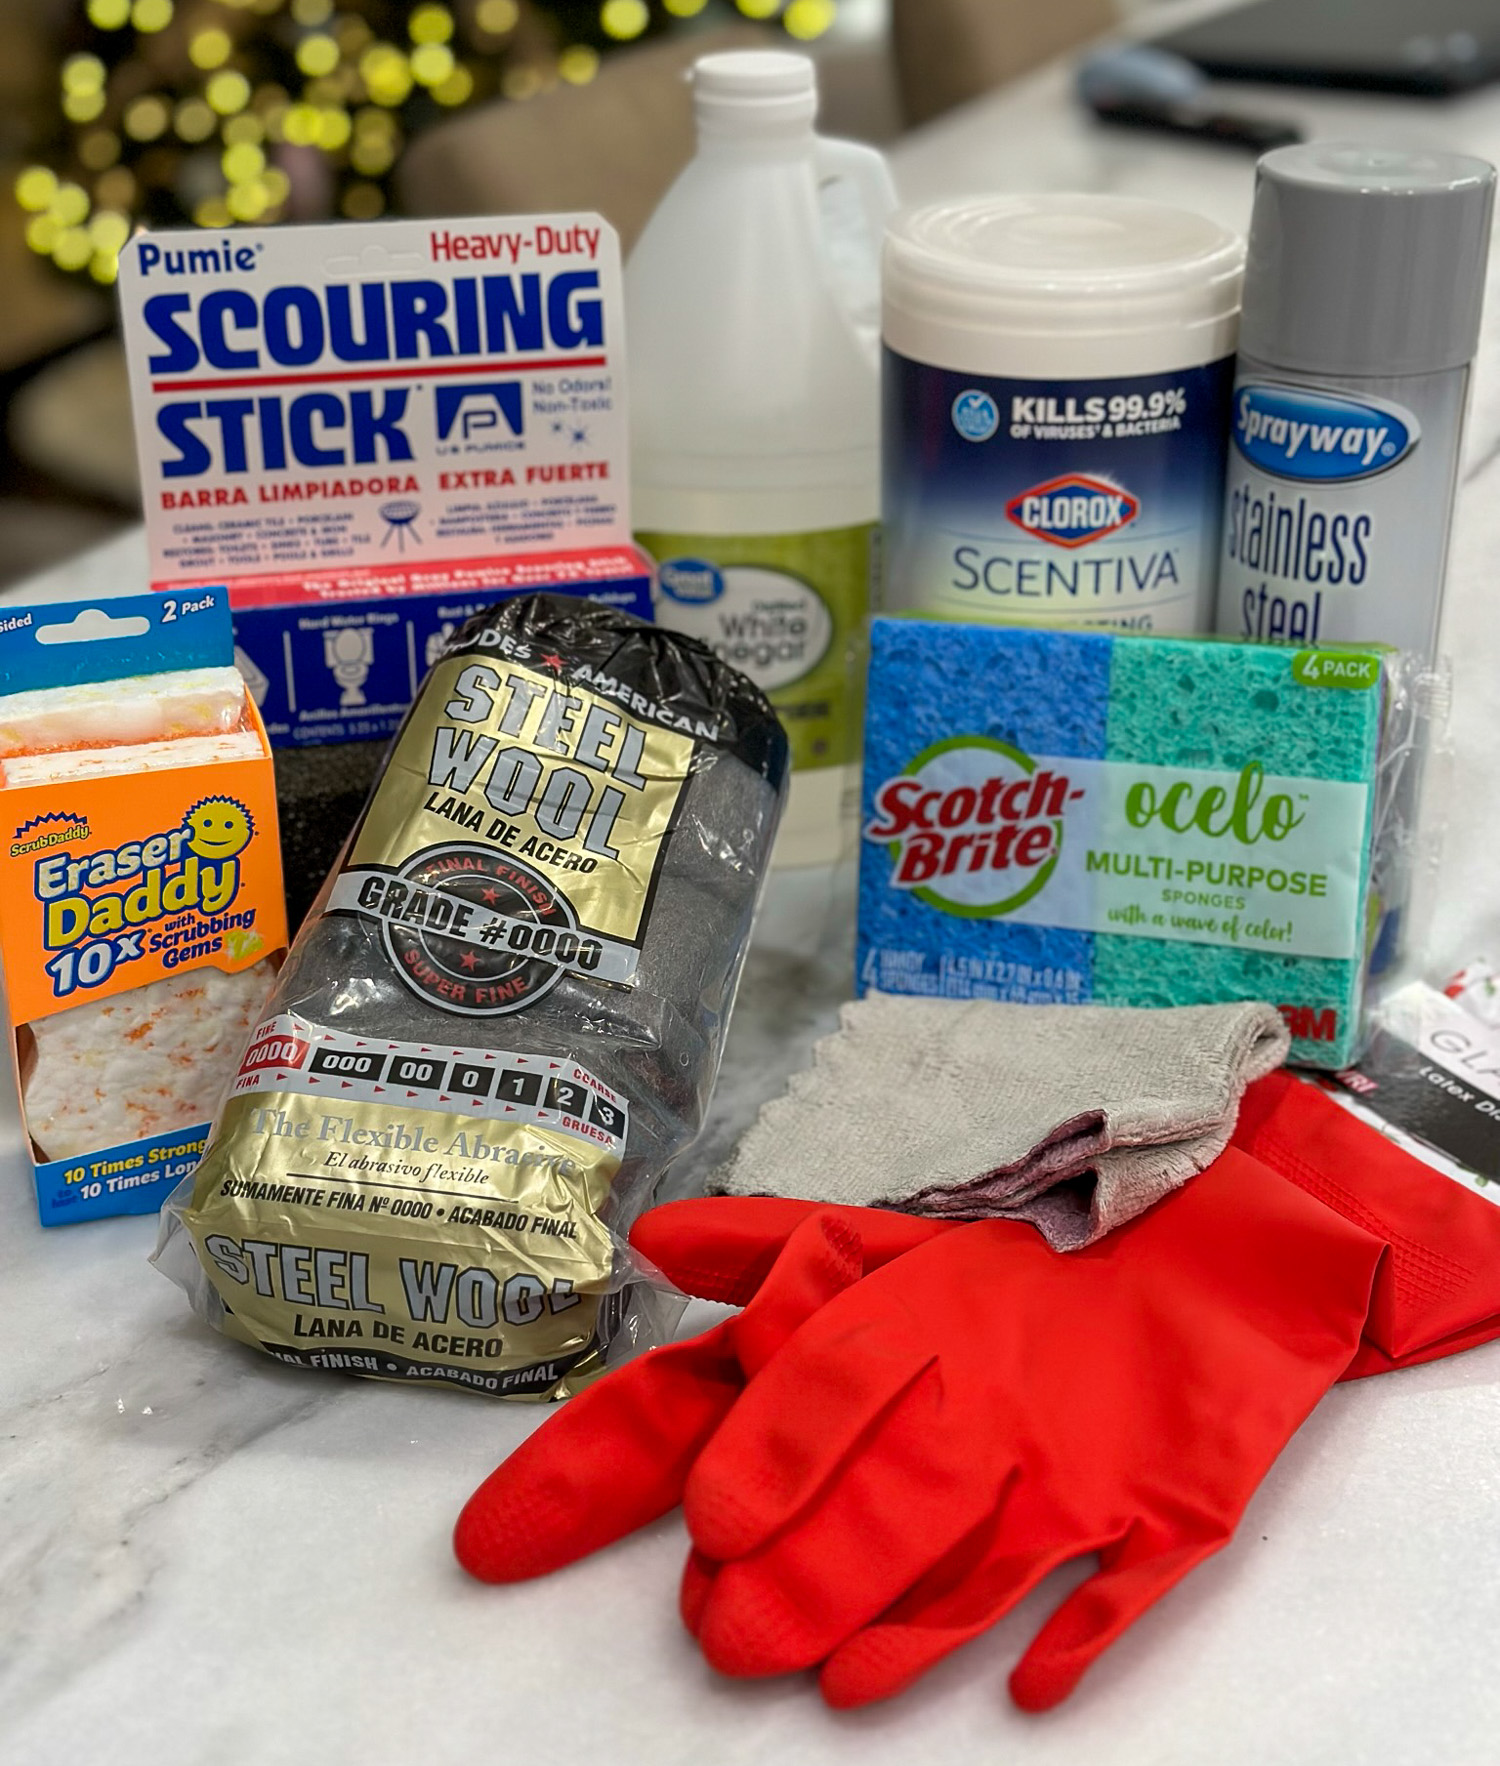 Various cleaning products for cleaning the Blackstone Griddle - grill stone, white vinegar, steel wool, gloves, sponges.